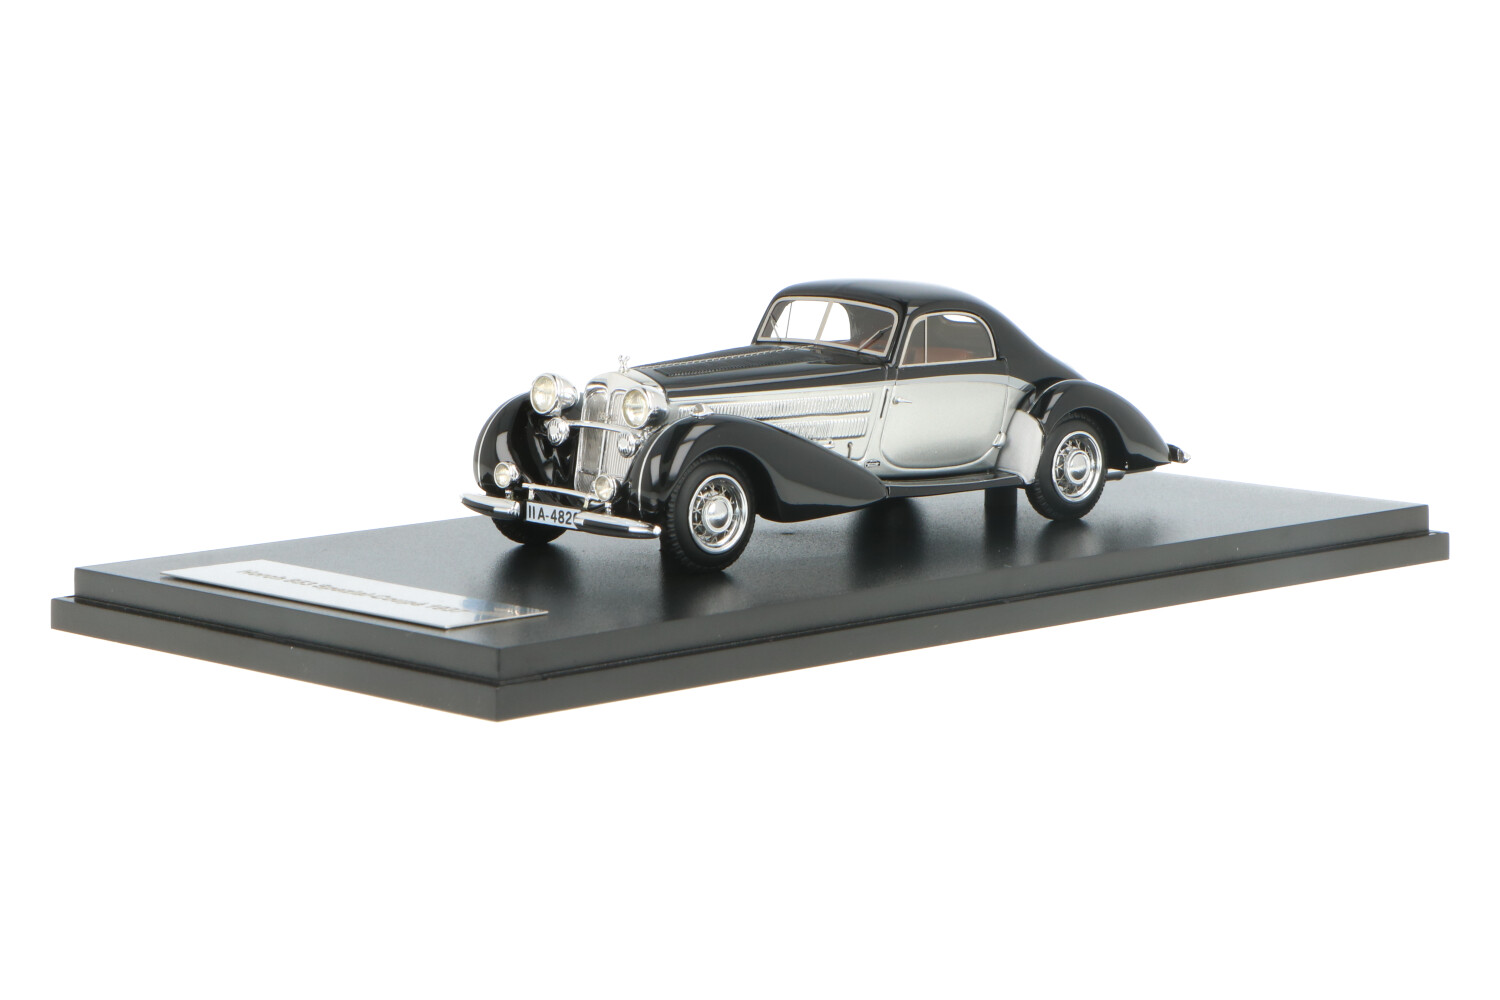 Horch-853-NEO44820_13157423355621622Horch-853-NEO44820_Houseofmodelcars_.jpg